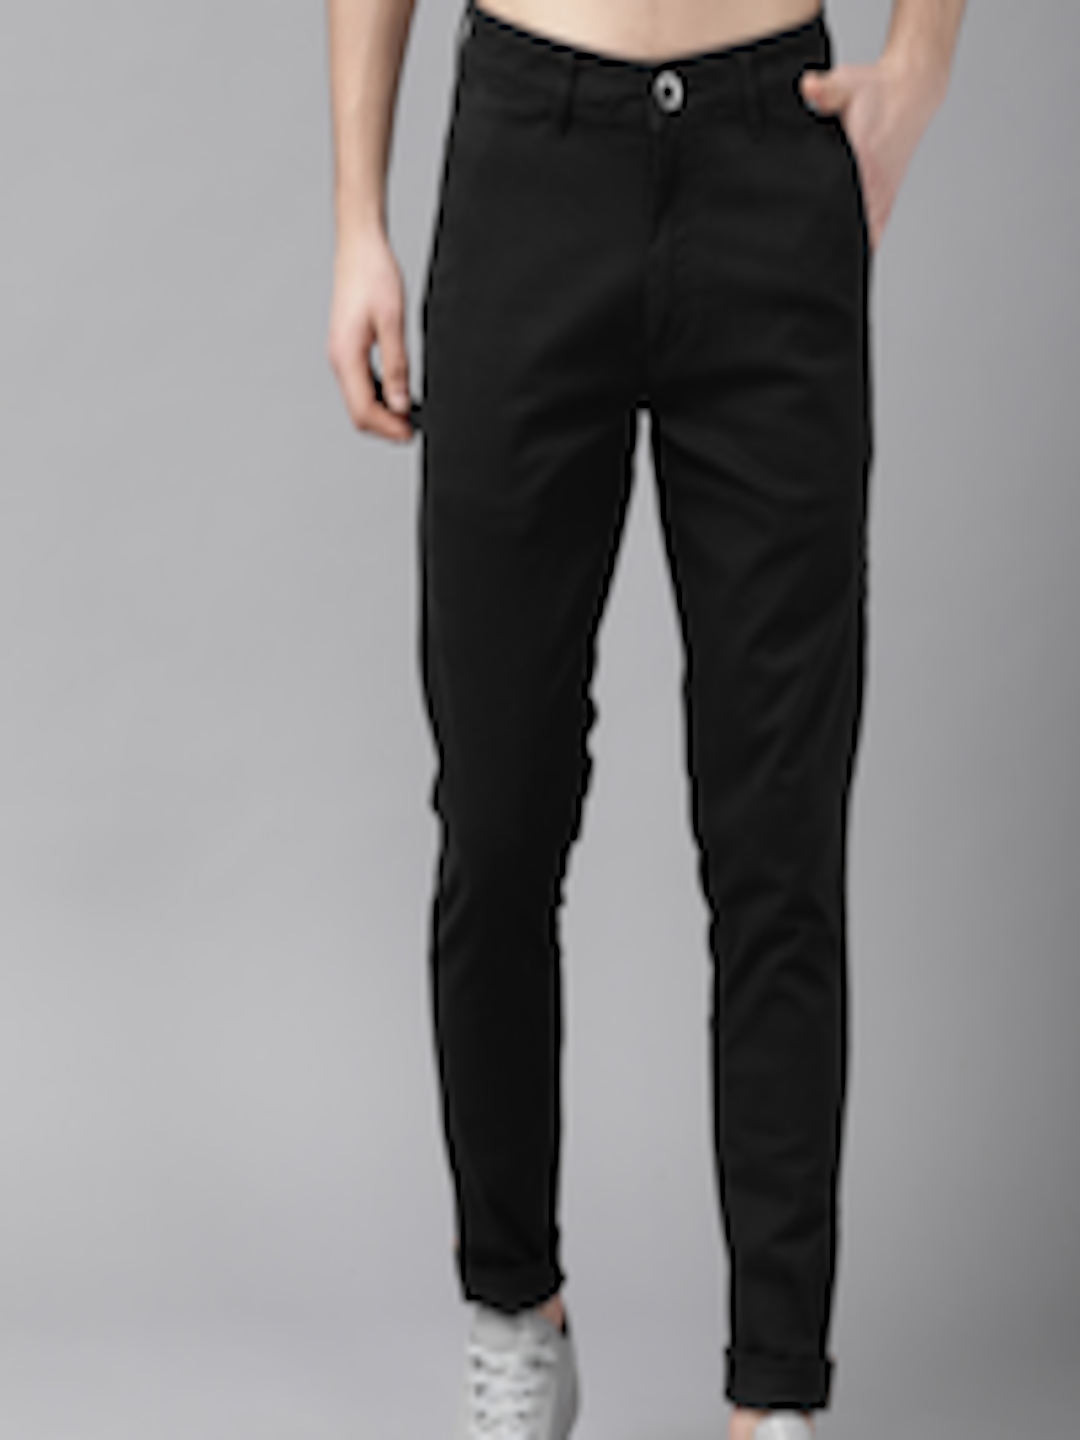 Buy Roadster Men Black Tapered Slim Fit Solid Chinos - Trousers for Men ...